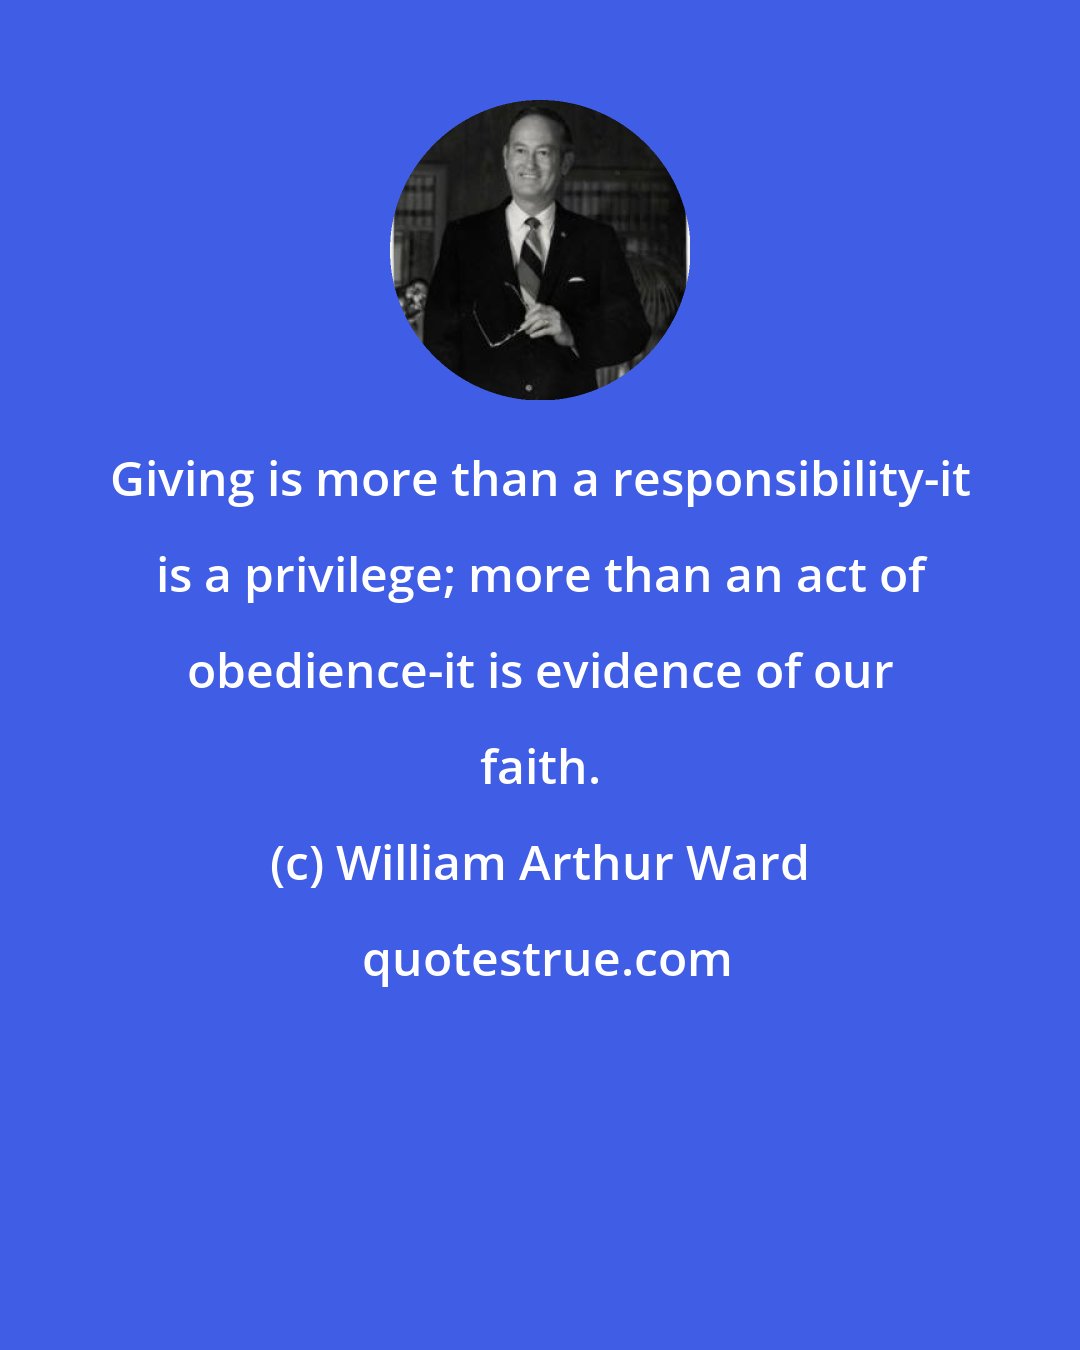 William Arthur Ward: Giving is more than a responsibility-it is a privilege; more than an act of obedience-it is evidence of our faith.